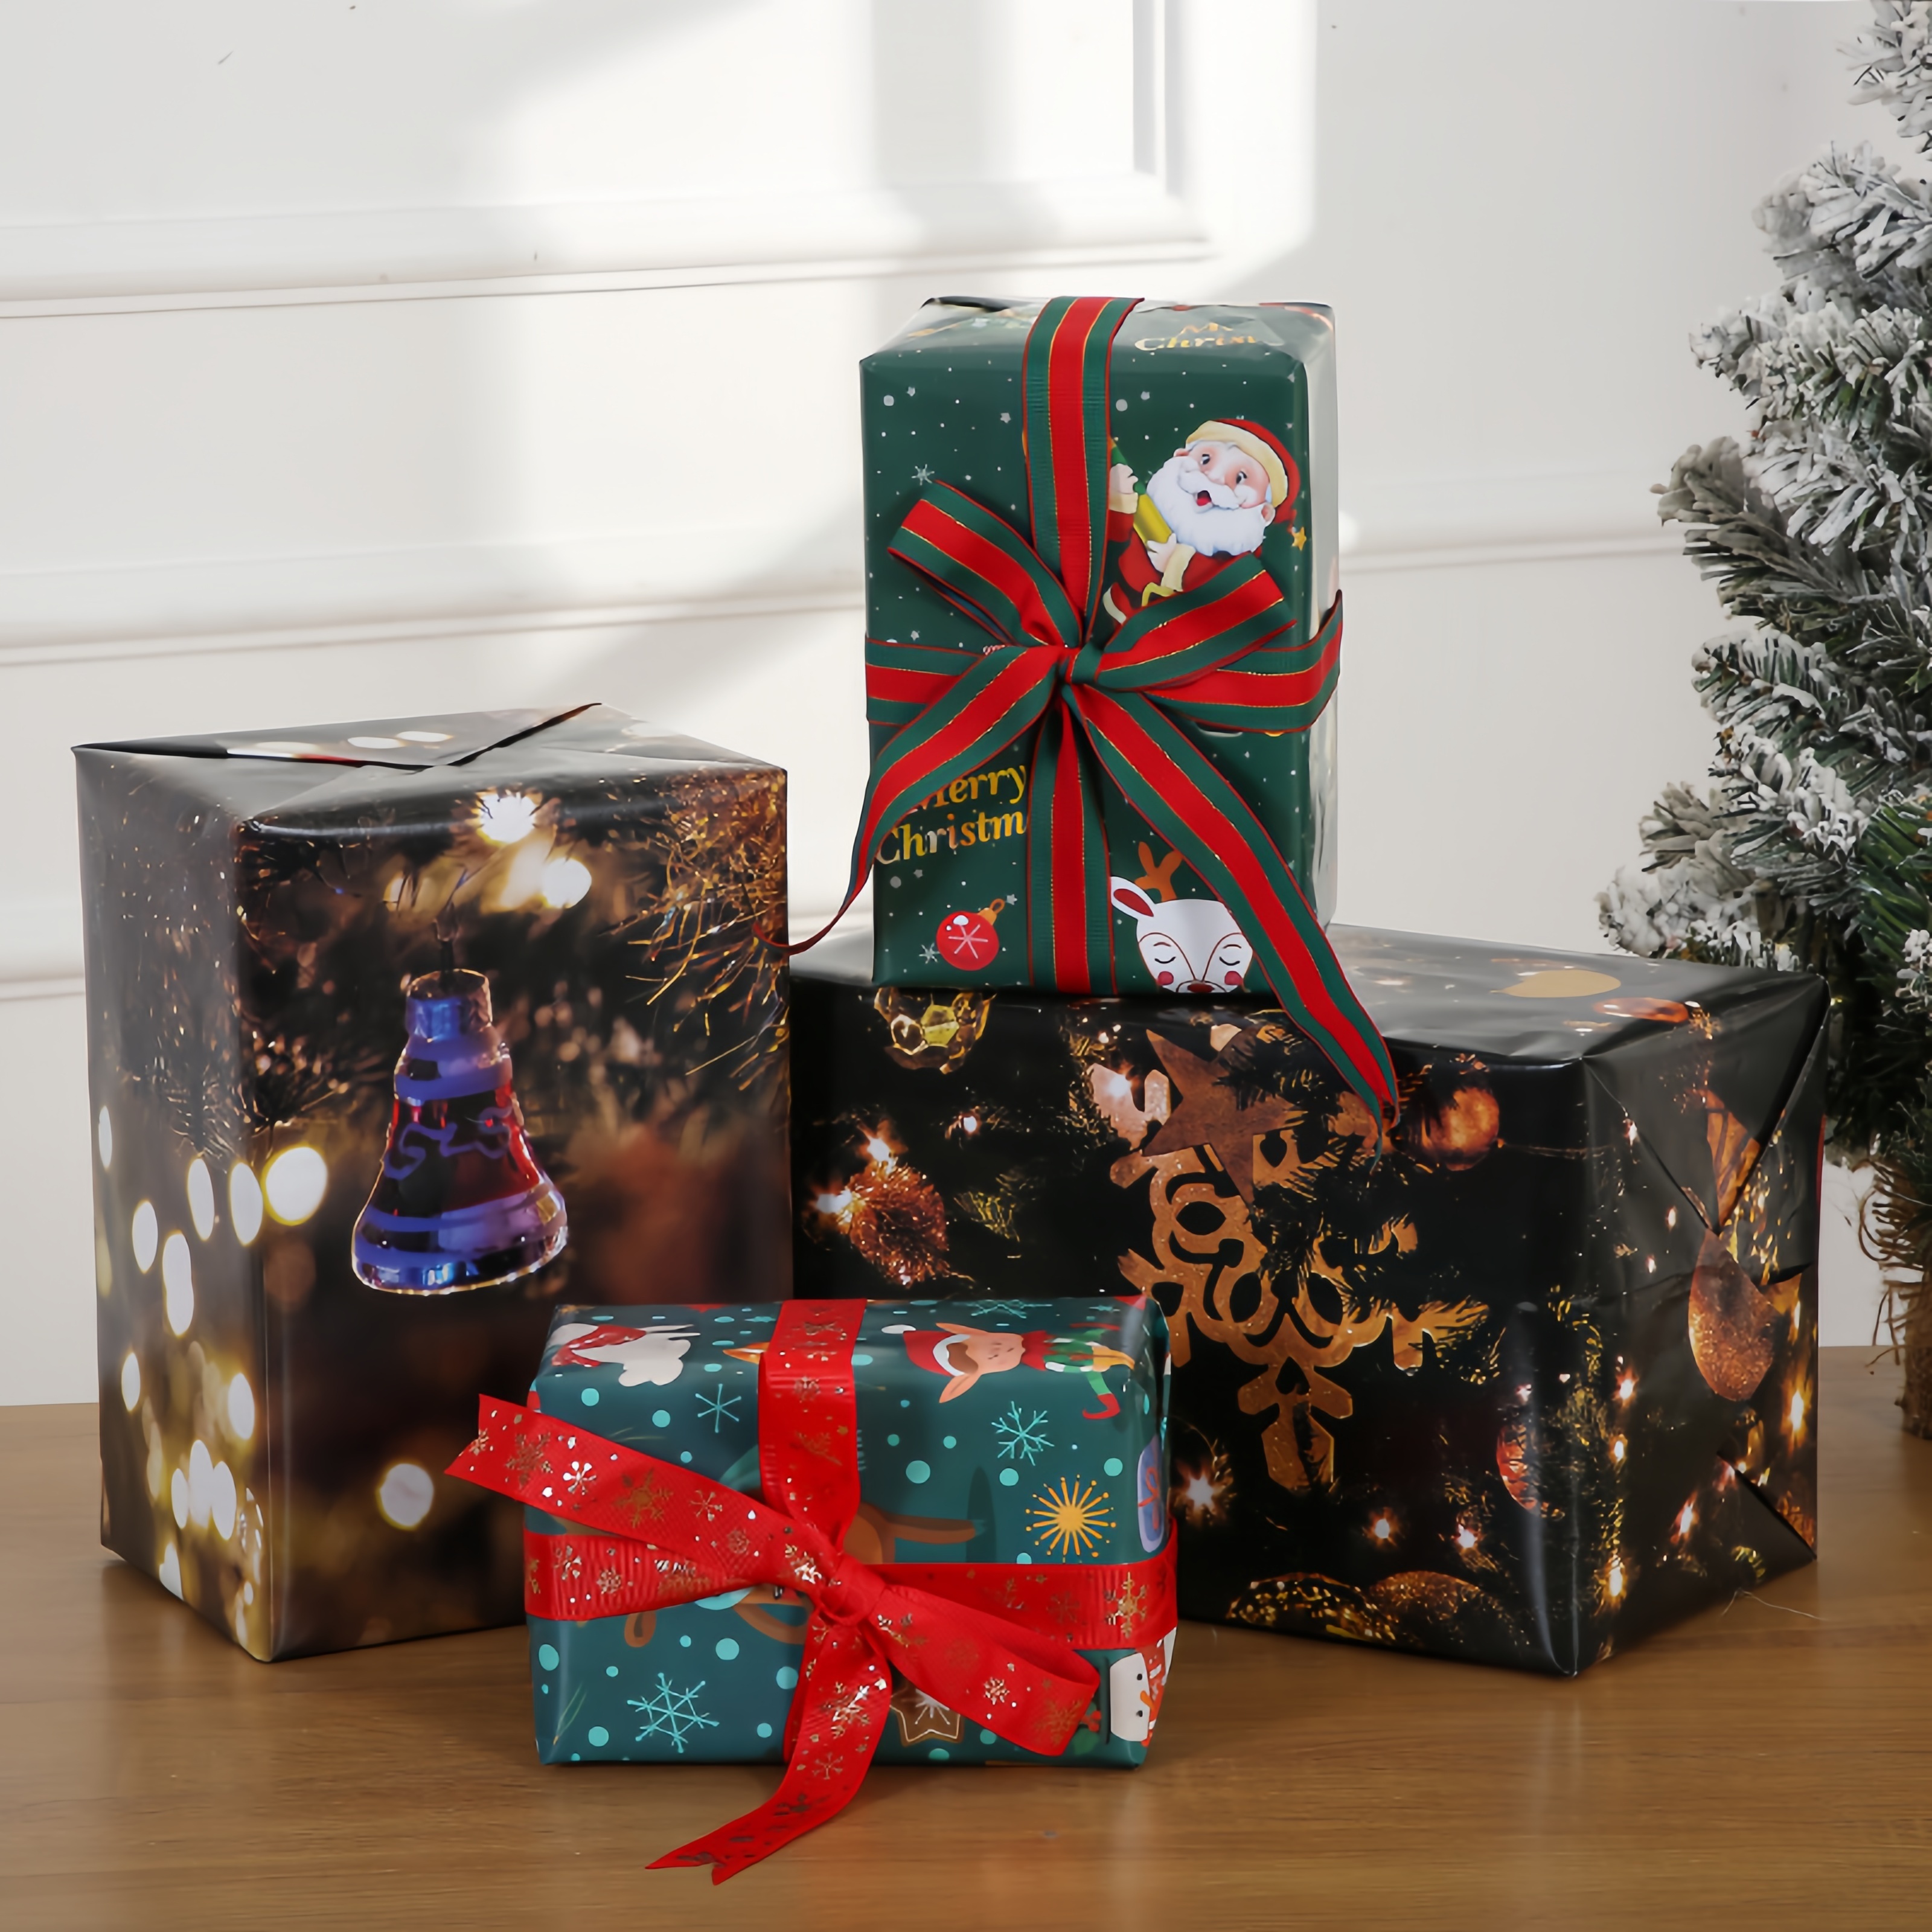 Christmas wrapping. Gift box, present with craft wrapping paper